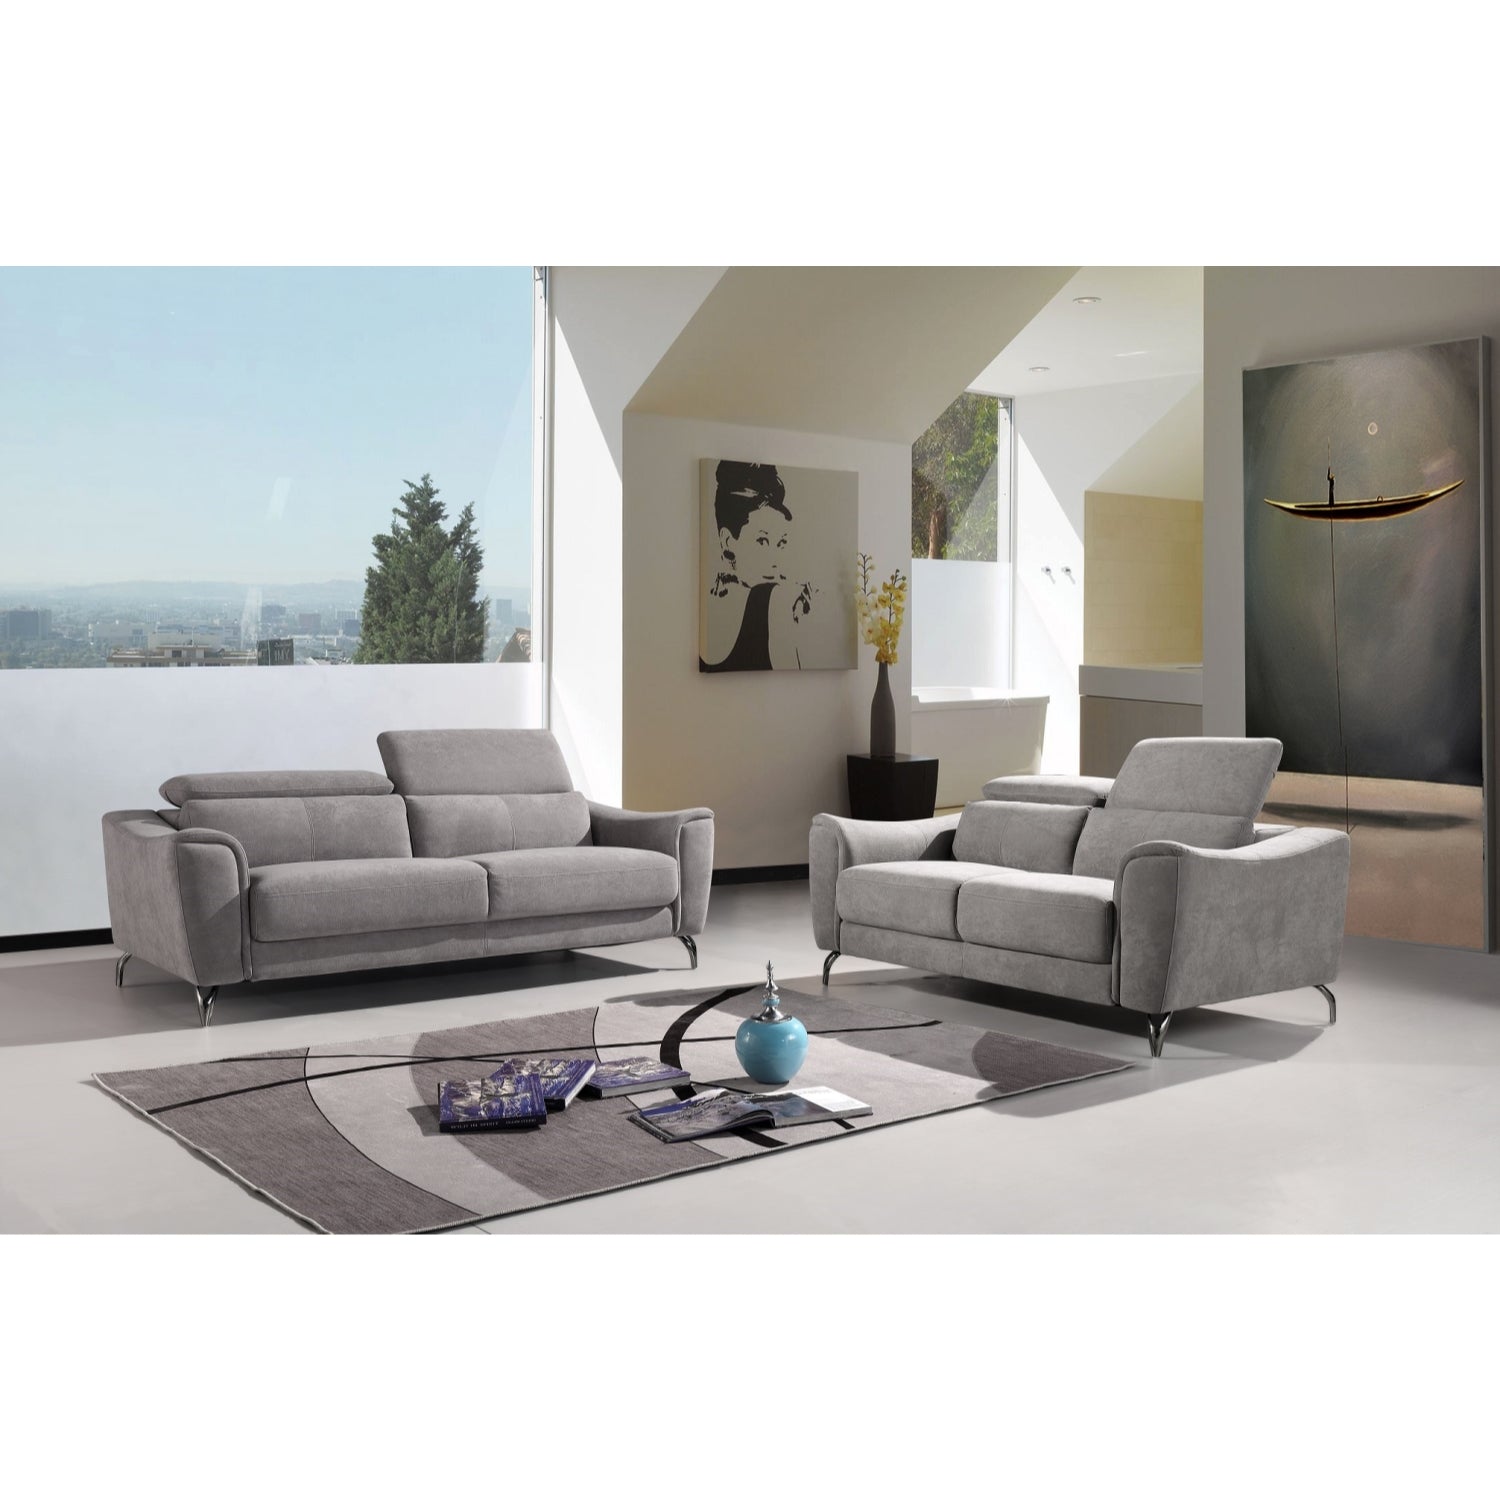 ViscoLogic Lancaster Adjustable Headrest Luxury Fabric 3-Seater Sofa/ Couch, Loveseat & Arm Chair (Grey (For GTA AREA ONLY)